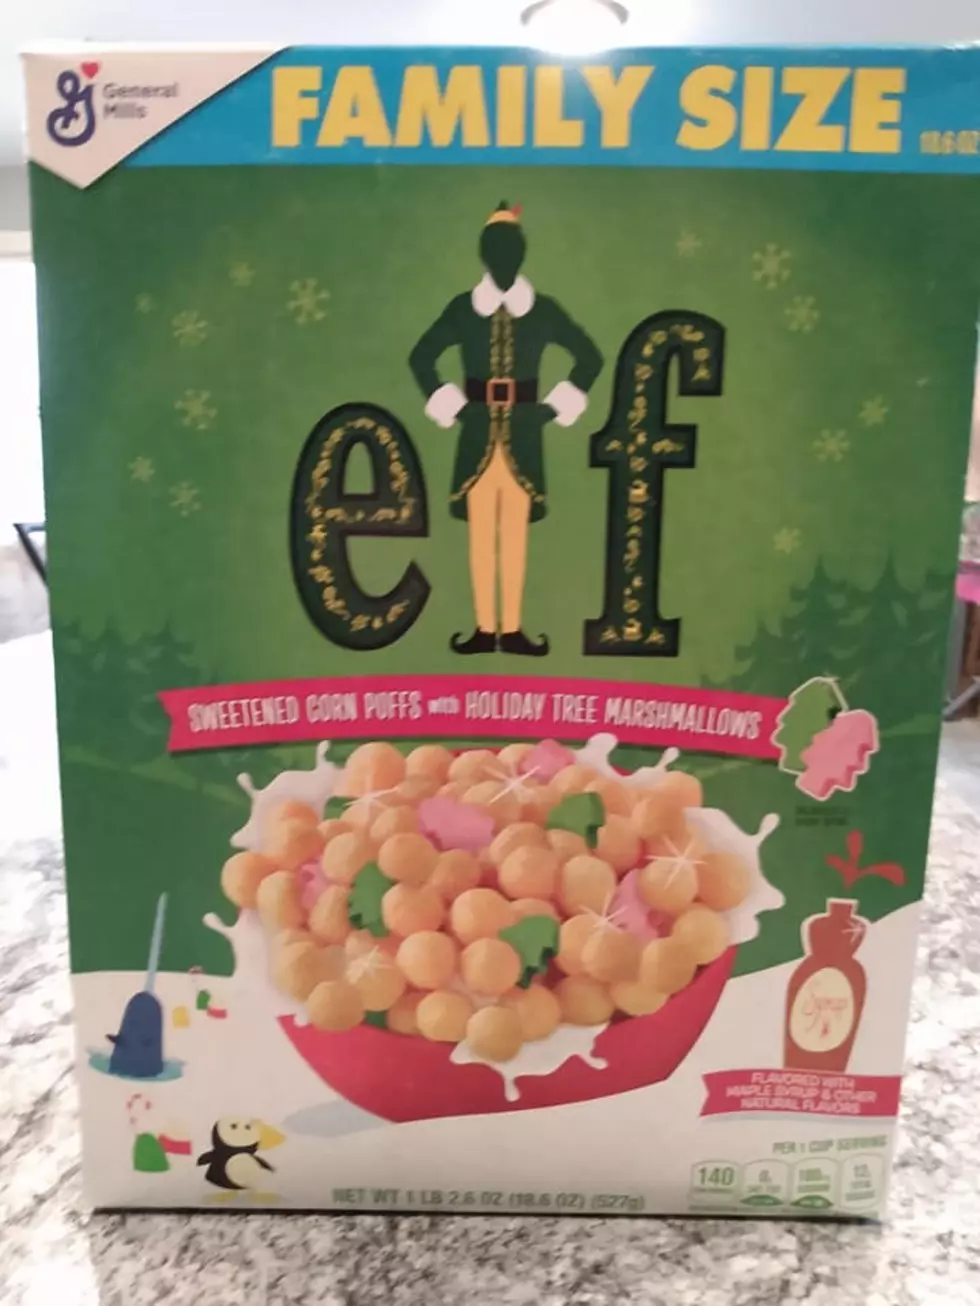 Our Elf on a Shelf Brought Us “Elf” Cereal